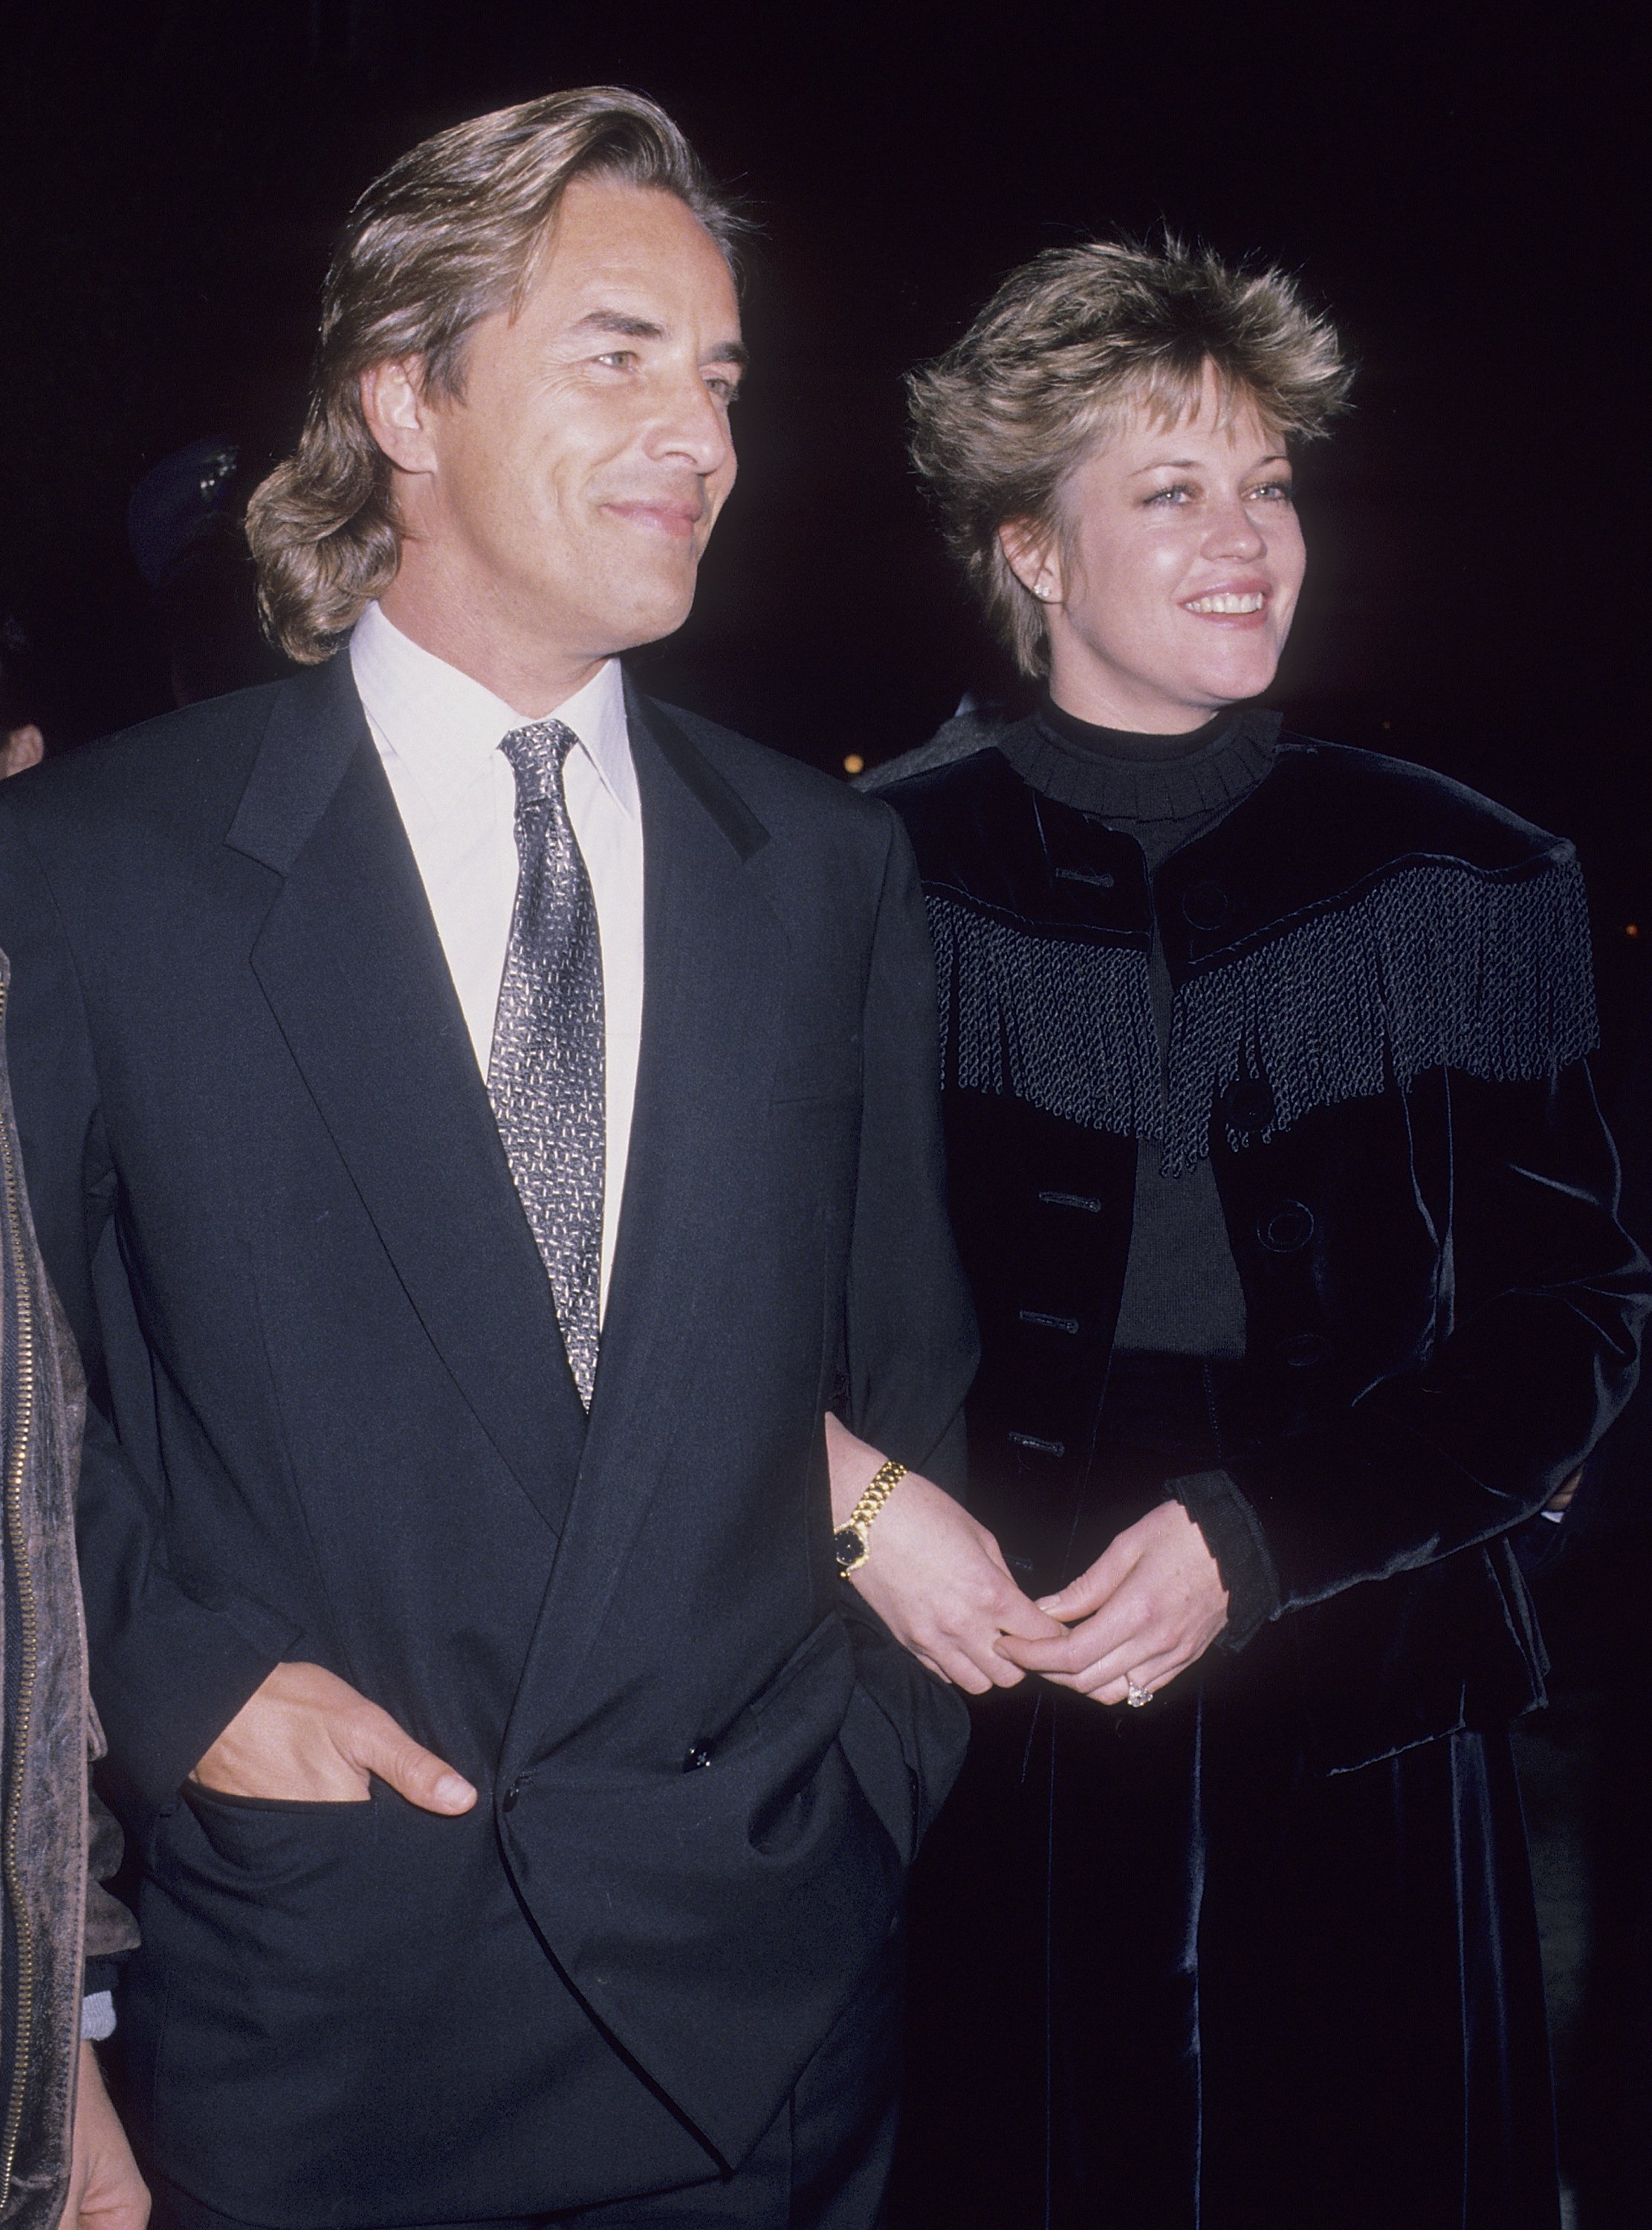 Actor Don Johnson and actress Melanie Griffith at the "Working Girl" Century City Premiere on December 19, 1988 at 20th Century Fox Studios in Century City, California. | Source: Getty Images